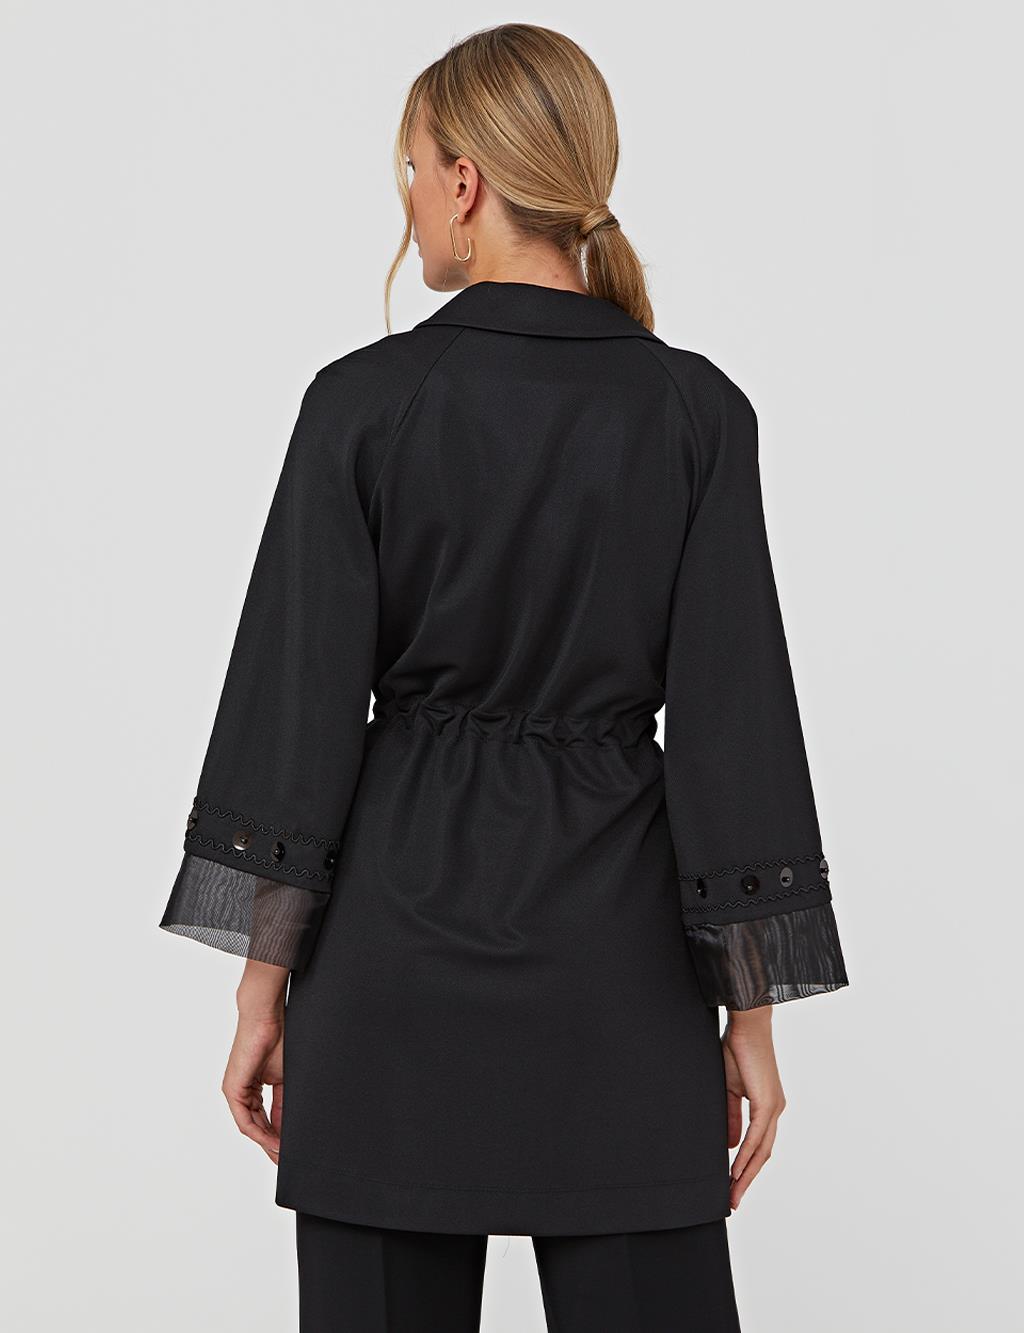 Double Breasted Collar Three Quarter Sleeve Jacket A21 13002 Black